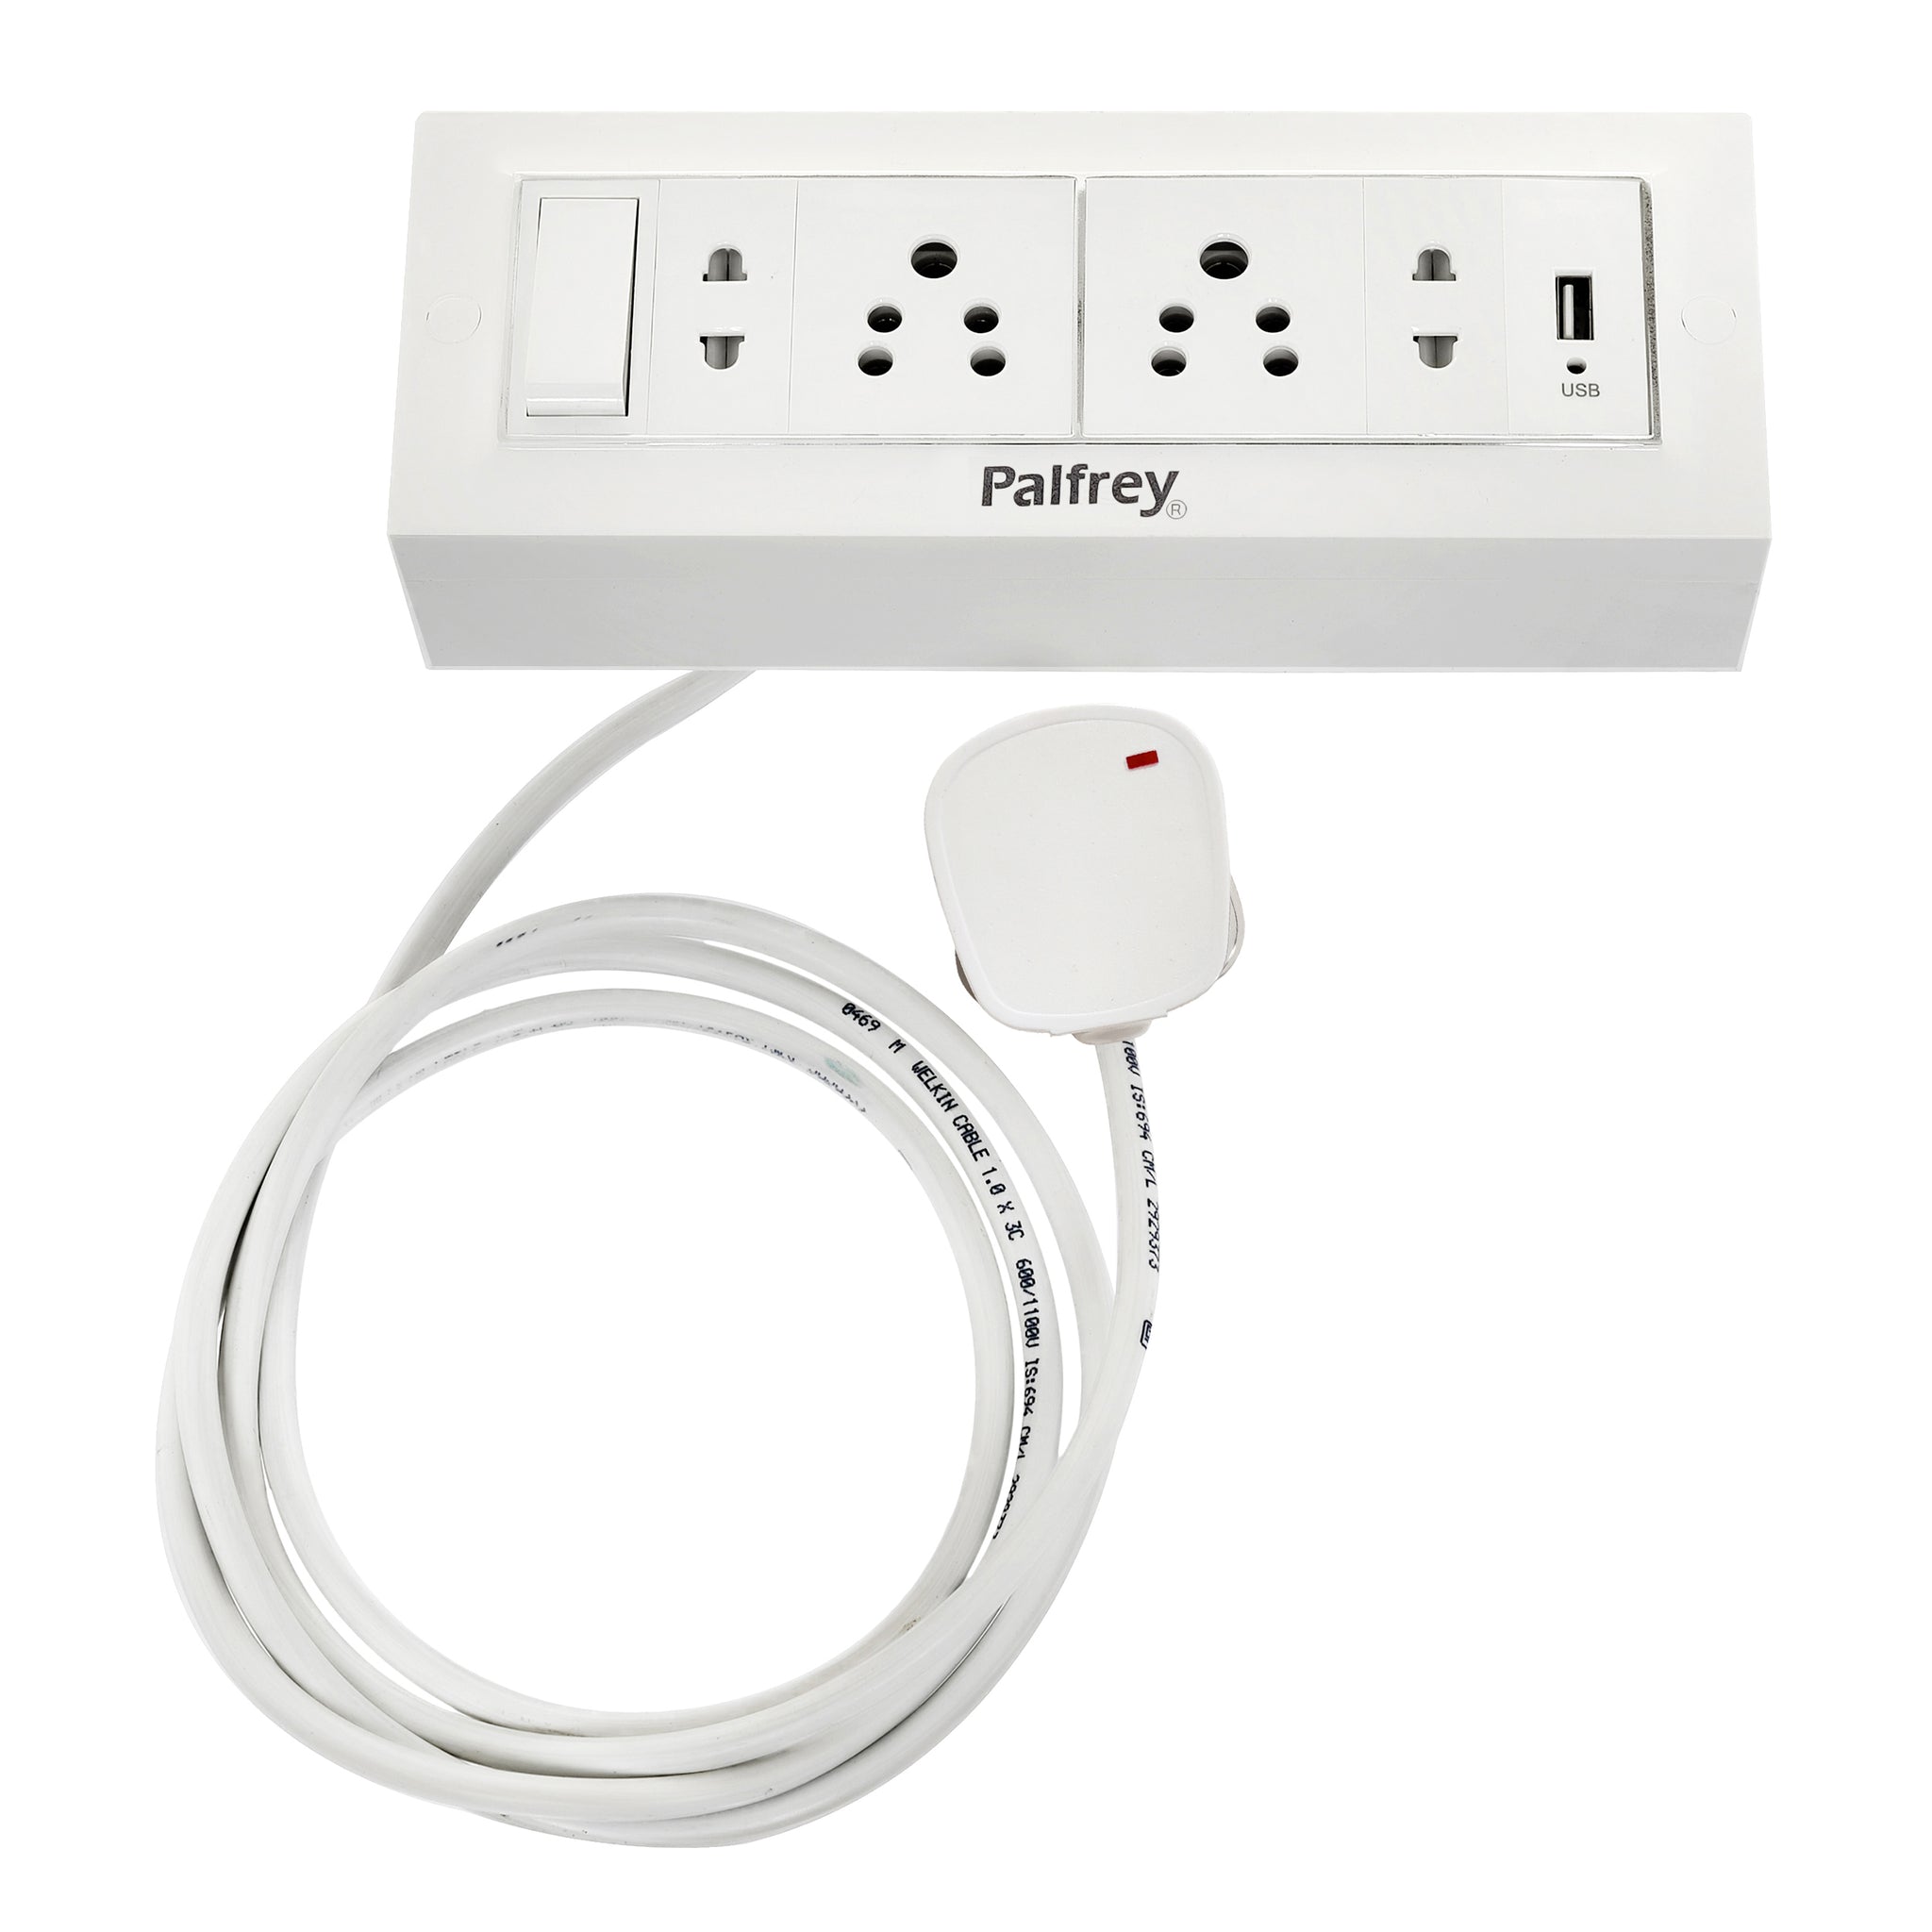 Palfrey Electric Extension Board - 5A + 5A + 2 Universal Two Pin Socket + USB Socket with Master Switch and Heavy Duty Wire (White)